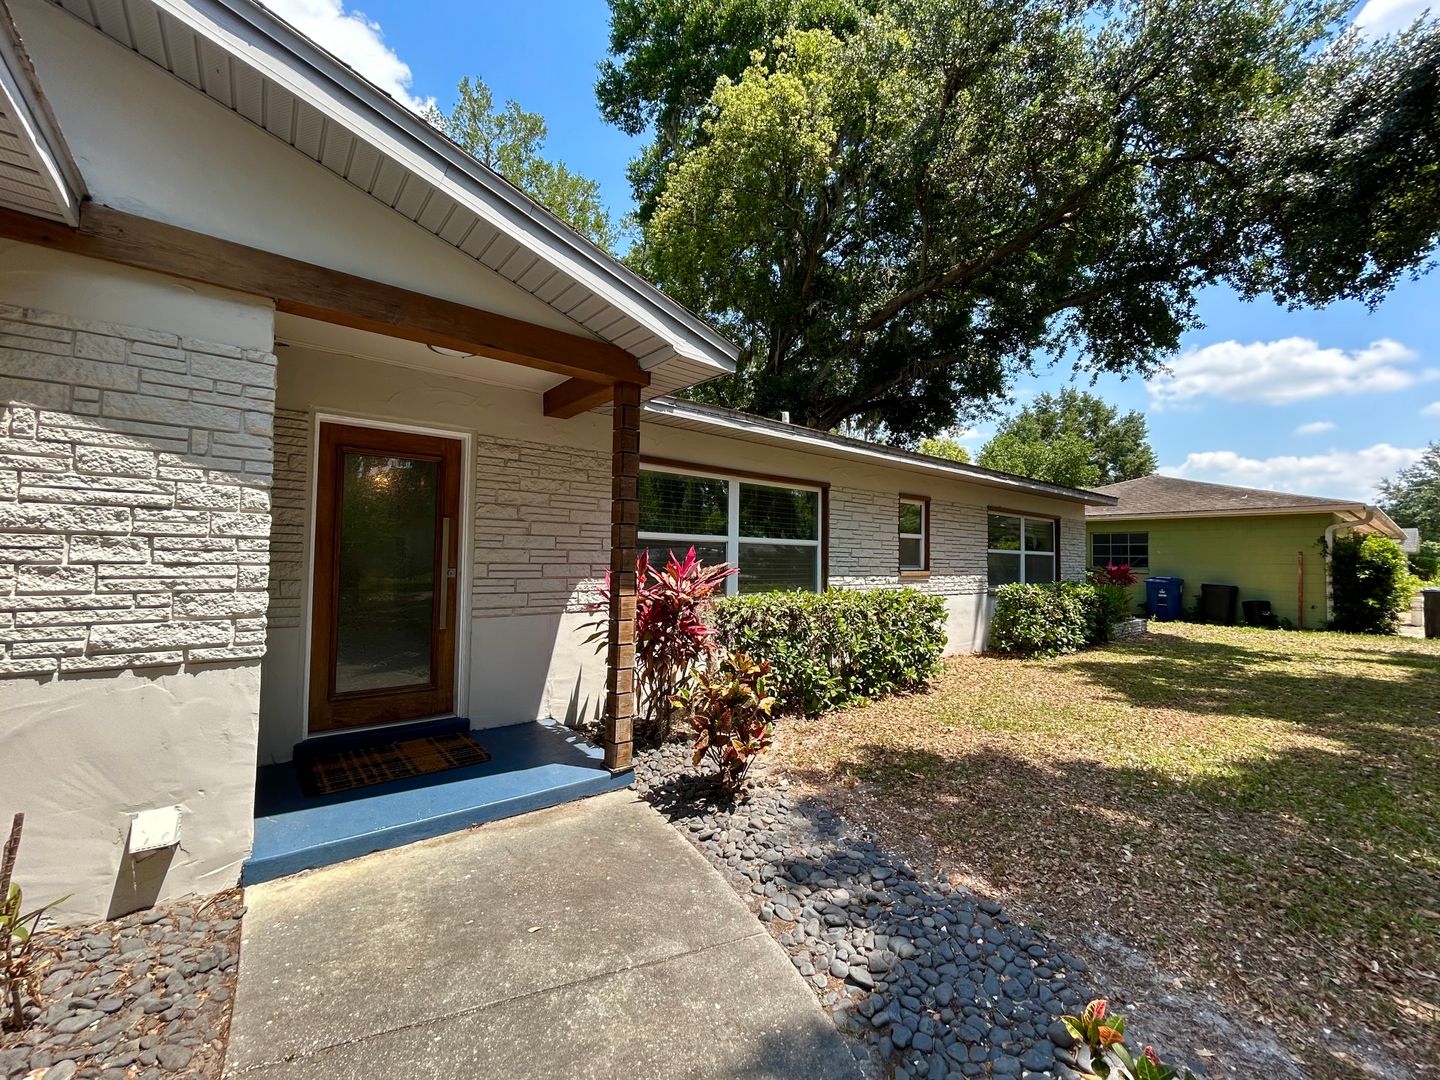 Gorgeous 3/2 Mid-century Modern Style Home with a Covered Patio and a Large Backyard in the Desirable Albert Lee Ridge Community - Winter Park!